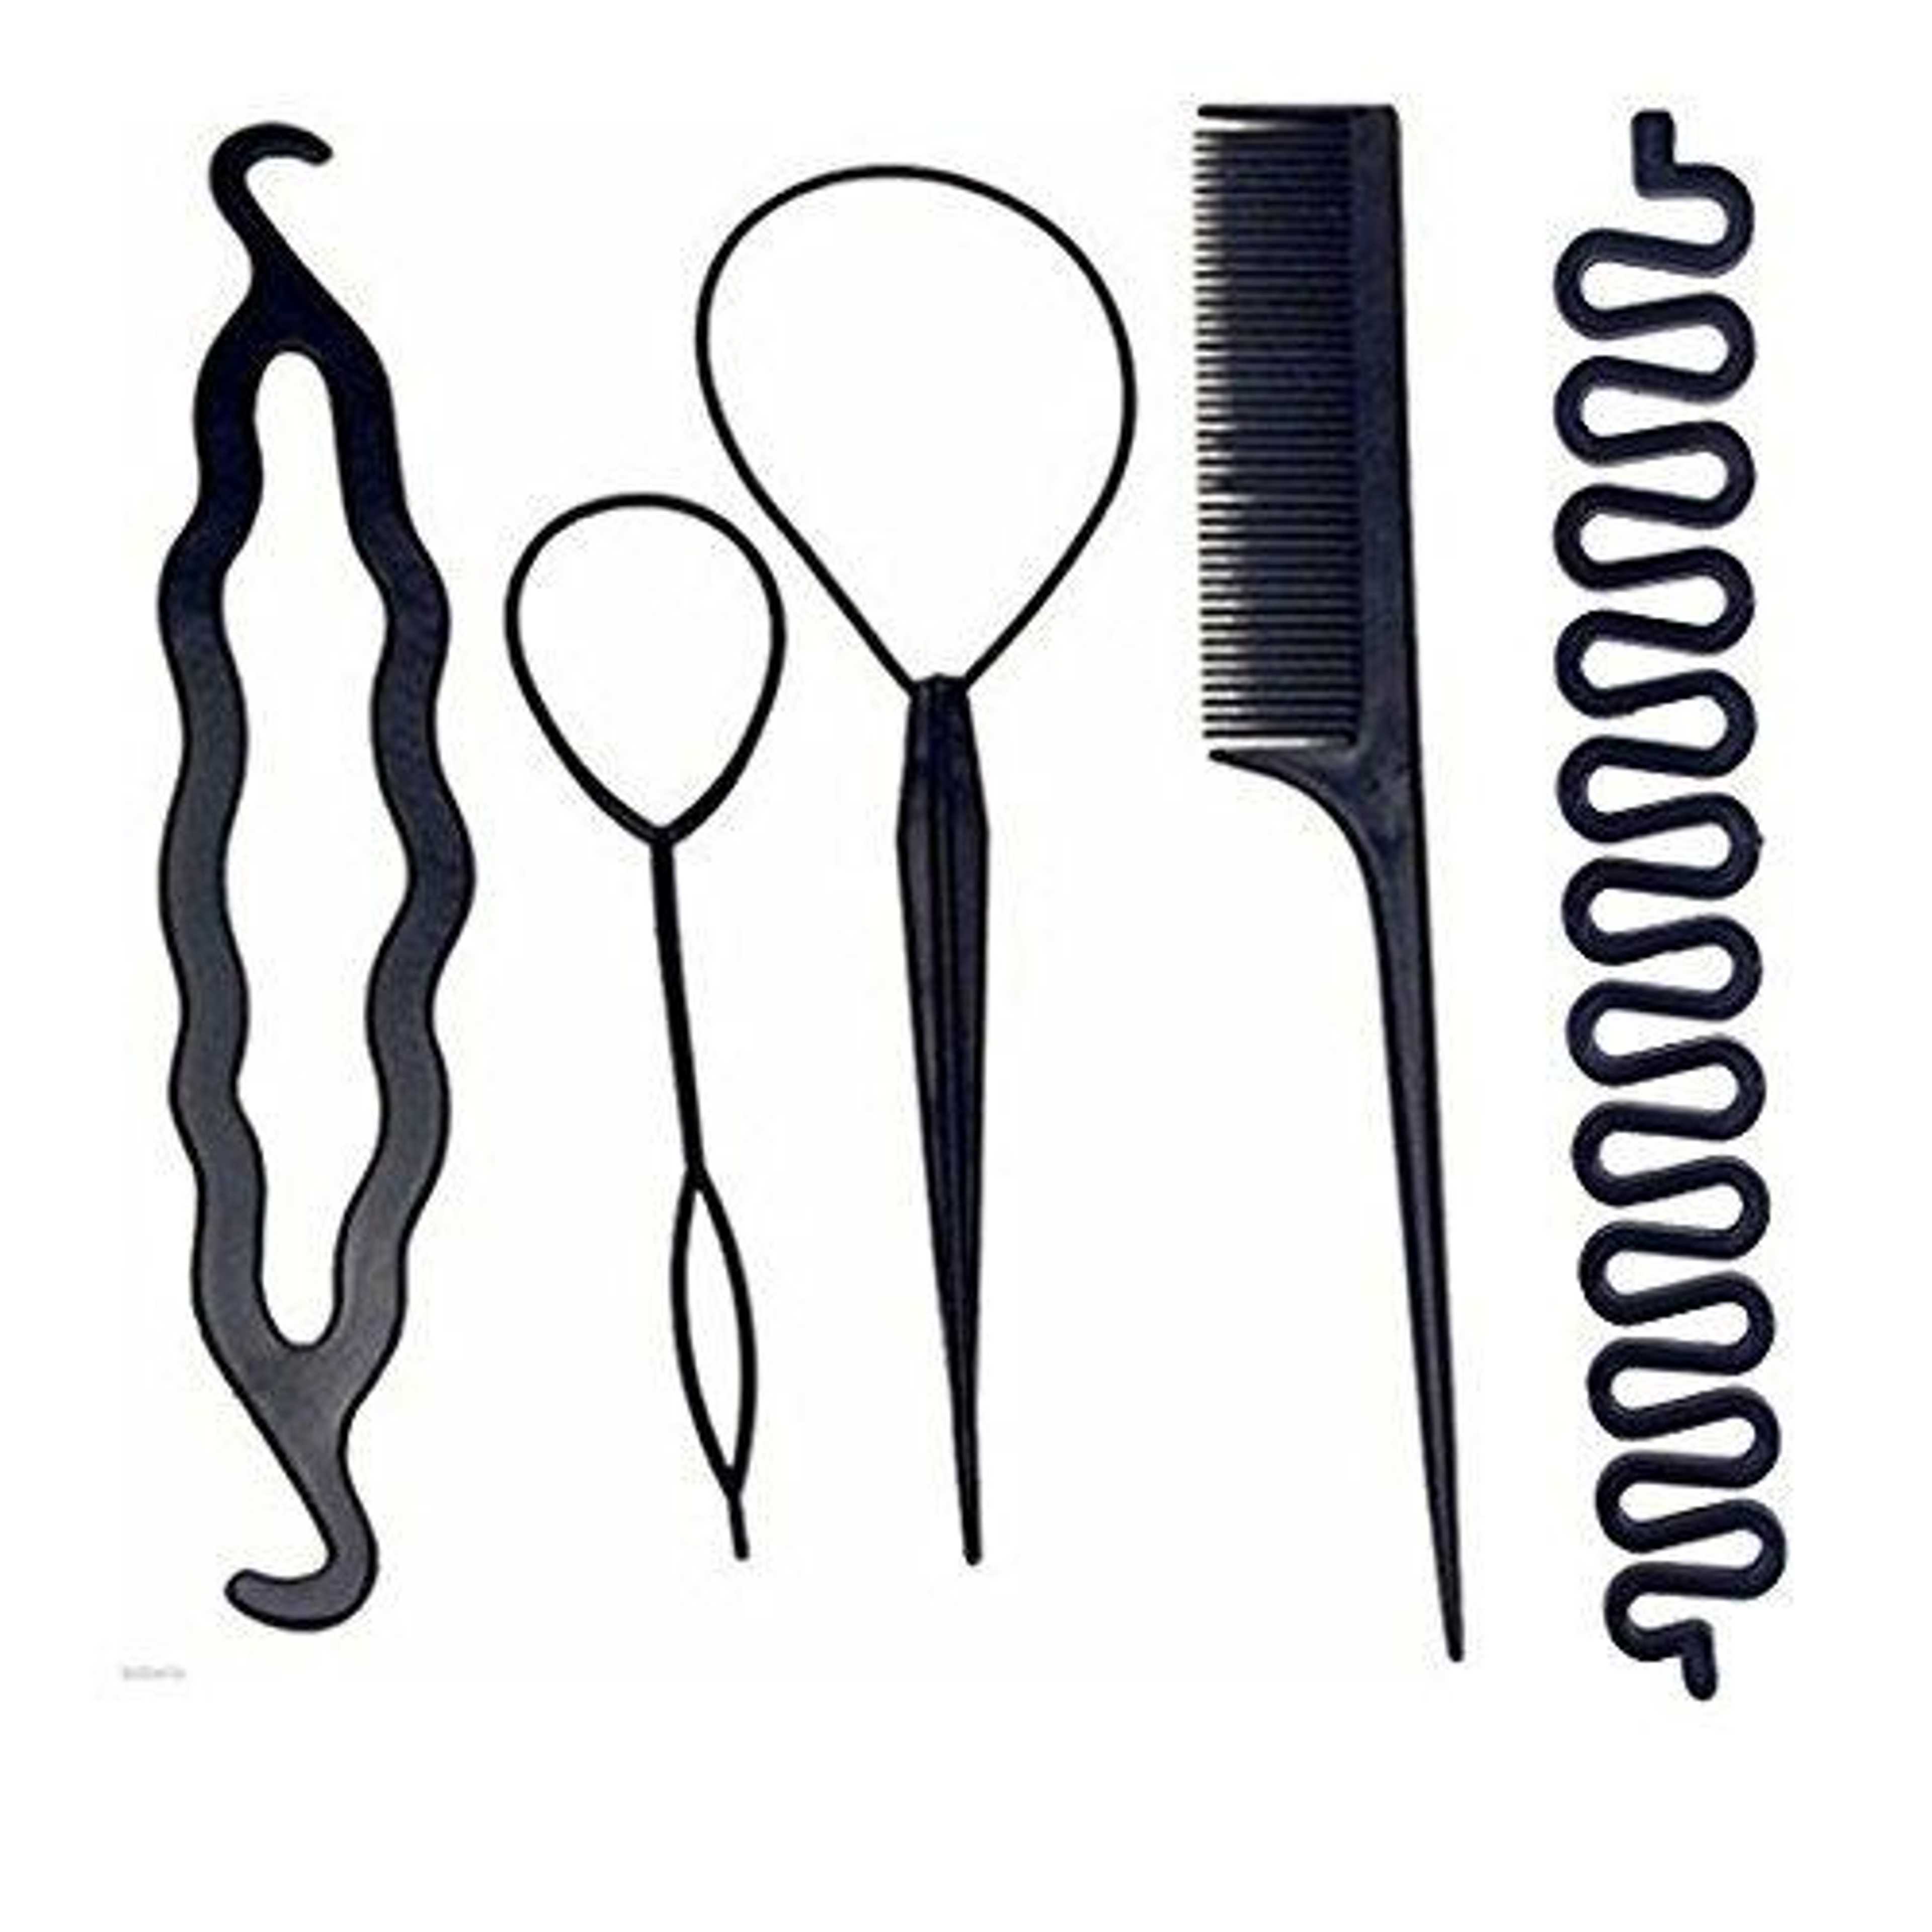 Professional Braids Hair Styling Tool Kit For Women  (Set Of 6 Pcs) Braids Tools with Zig Zag Pony Tail Makers Women Girls DIY Hair Styling Set Kit Tools Accessories Hair Accessories Set Pull Hair Needle Dish hair Comb Tools As Picture